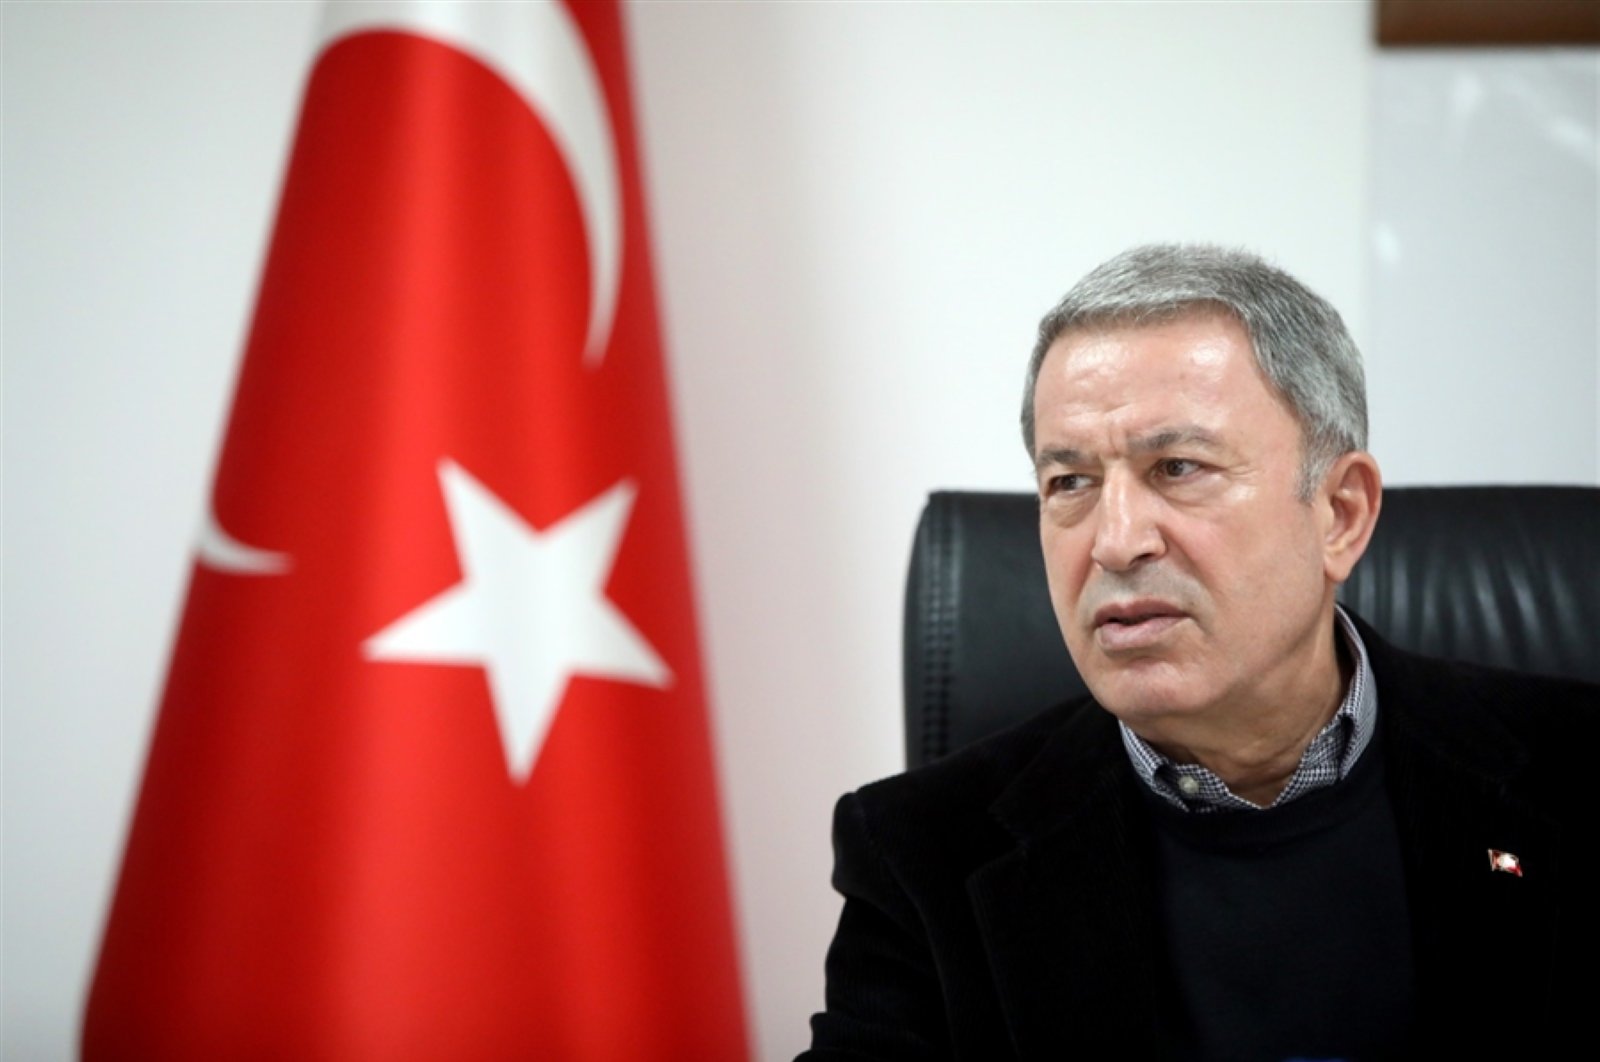 Defense Minister Hulusi Akar speaks at the Turkey-Syria border on the Syrian crisis, March 7, 2020. (DHA Photo)